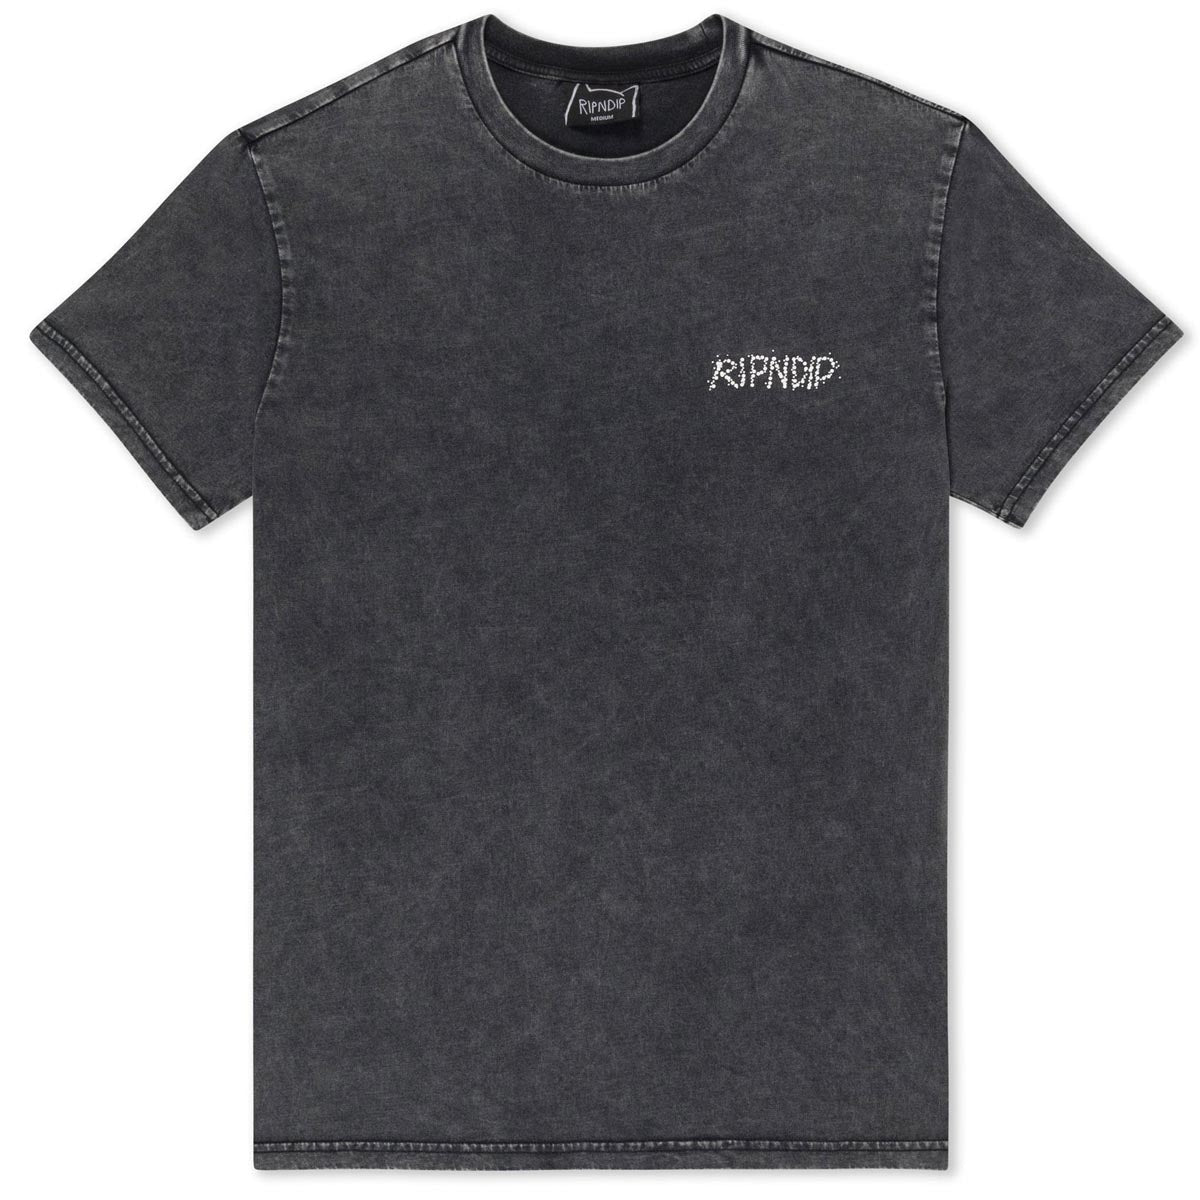 RIPNDIP You Are Here T-Shirt - Black image 2